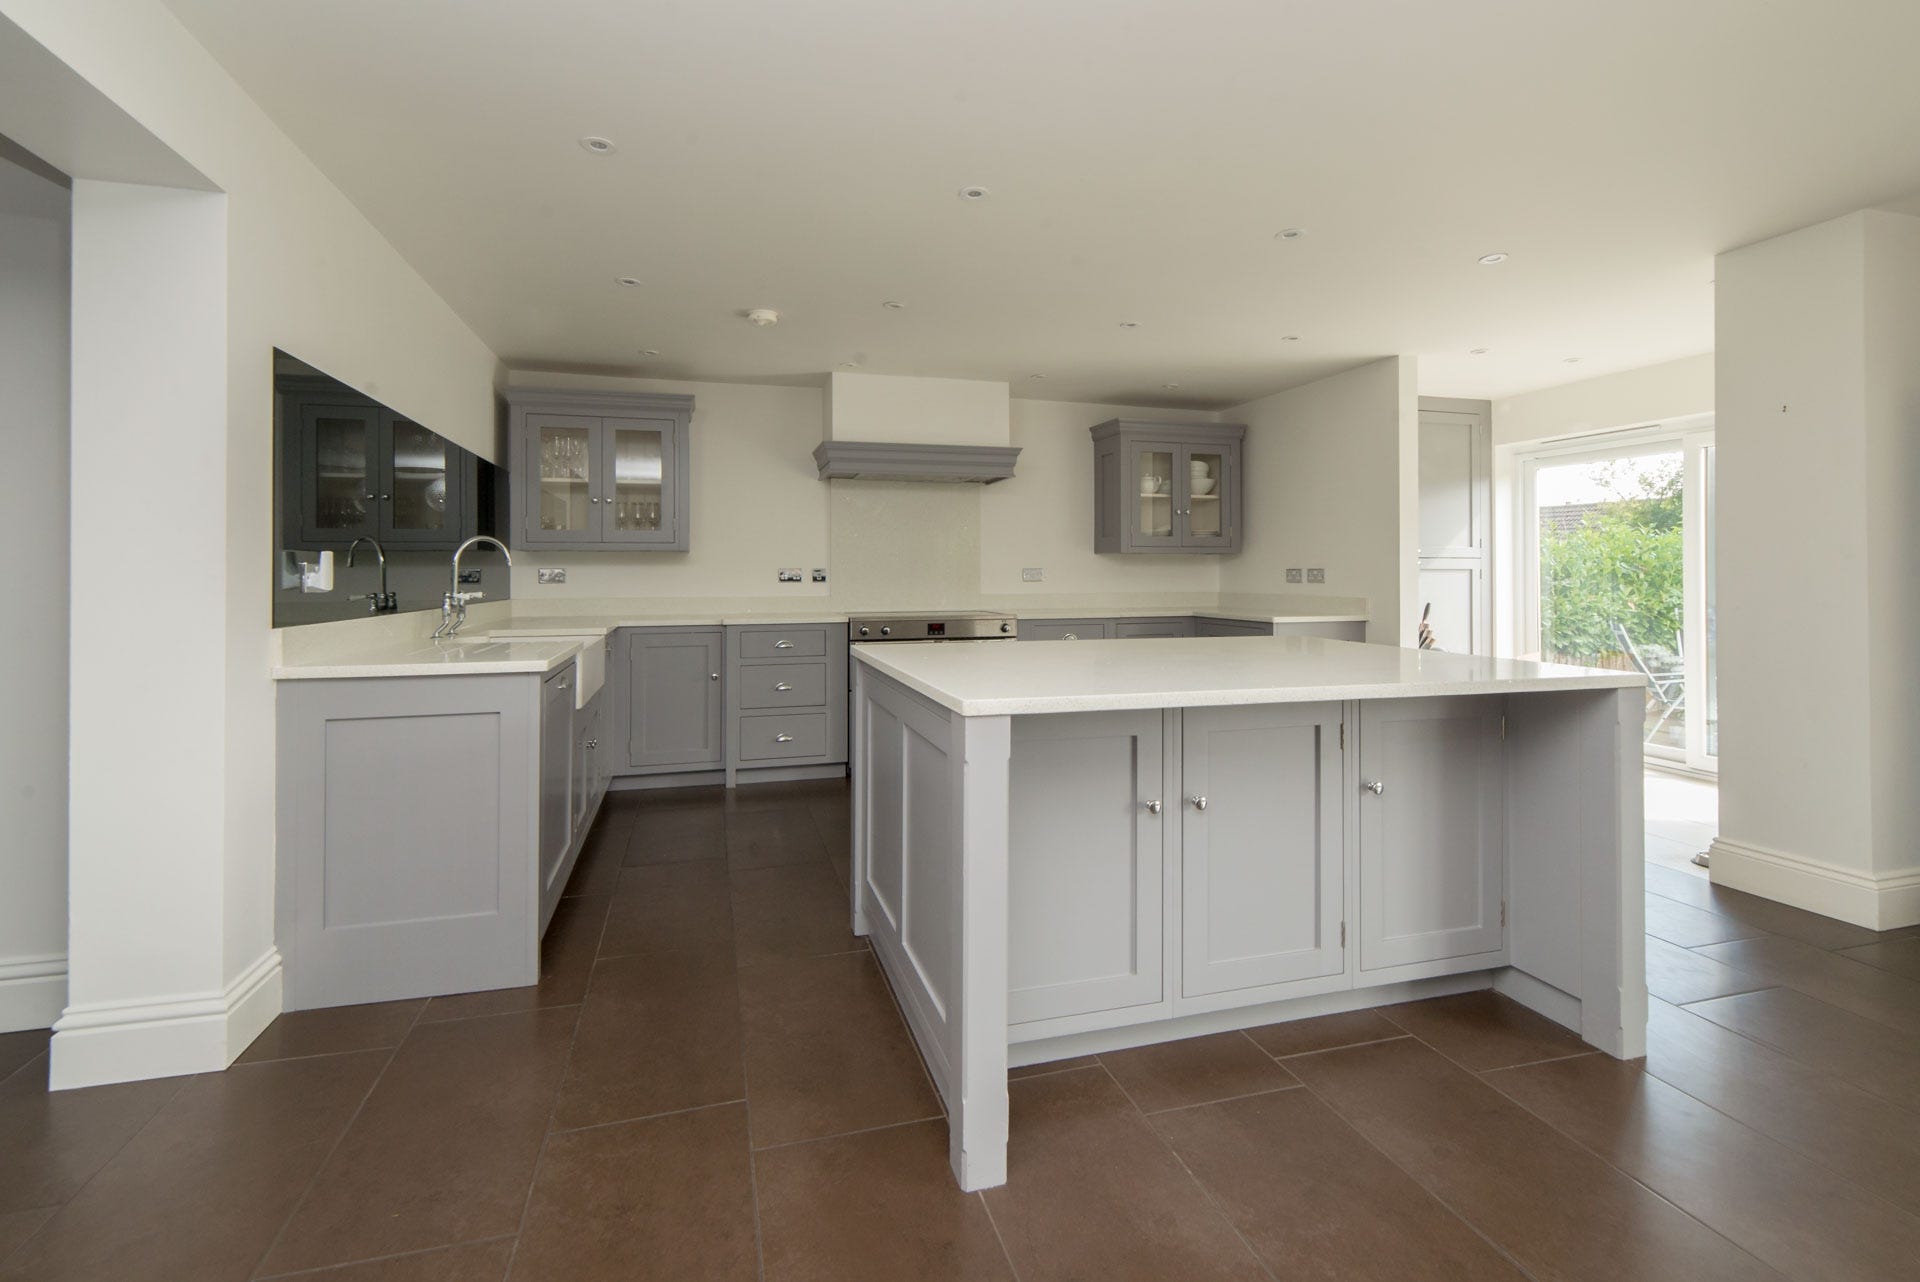 Approved Used Kitchen, Painted In Frame, Belling Range Oven, Hertfordshire